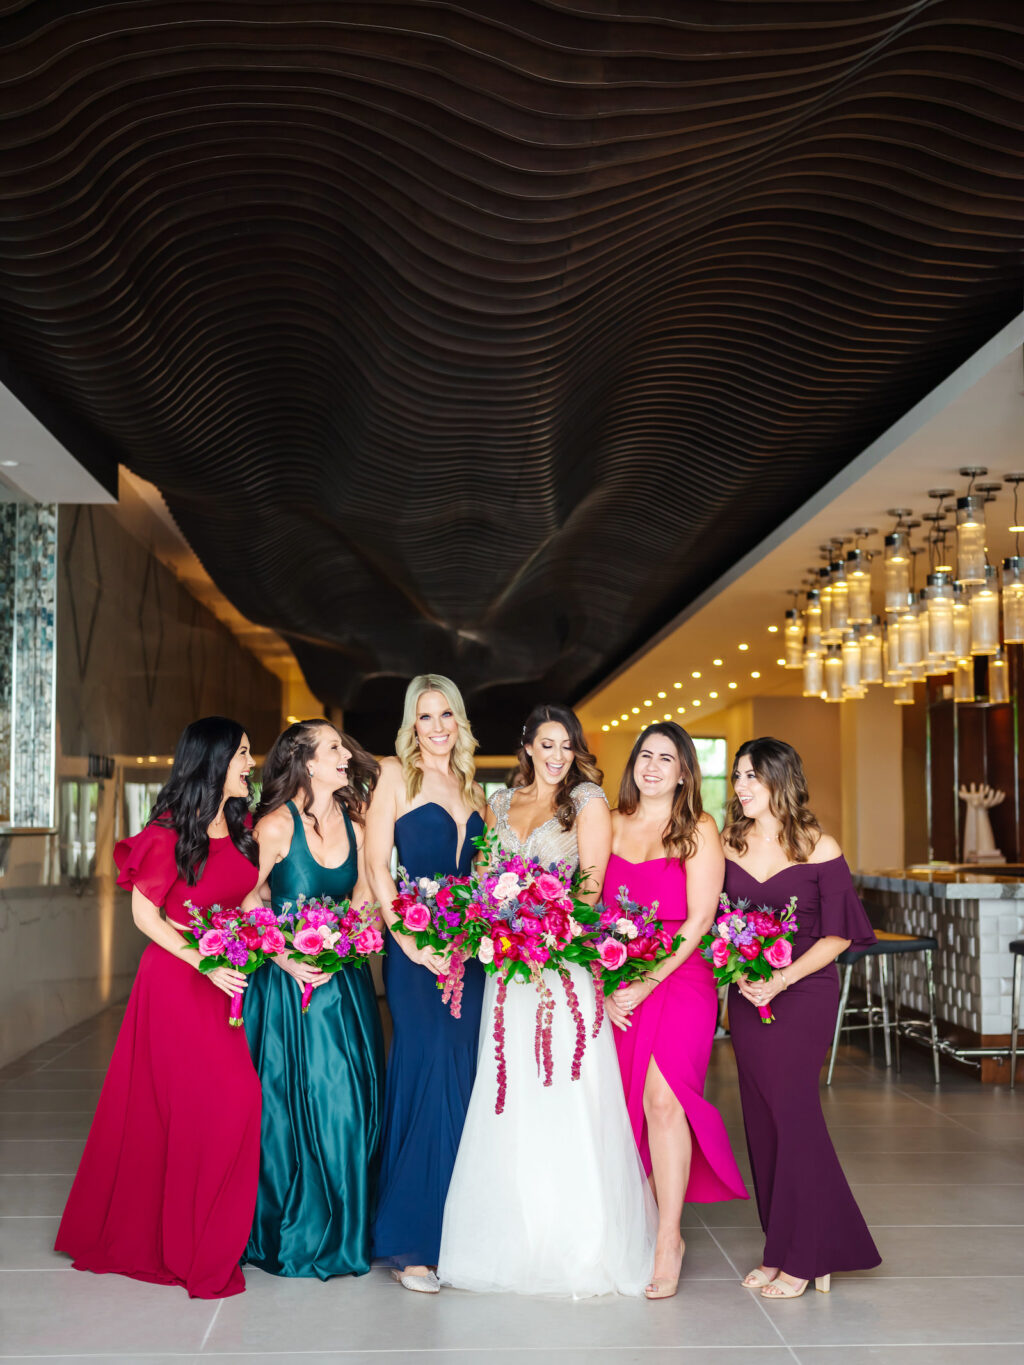 Bride Wearing Gold and Silver Beaded Cap Sleeve Bodice and Flowy Sheath Skirt Wedding Dress Holding Colorful Pink, Purple, Blush Pink, Greenery and Hanging Amaranthus Floral Bouquet, Bridesmaids Wearing Jewel Toned Mismatched Dresses, Red, Turquoise, Blue, Fuschia, and Plum Purple Dresses | Tampa Bay Wedding Florist Iza's Flowers